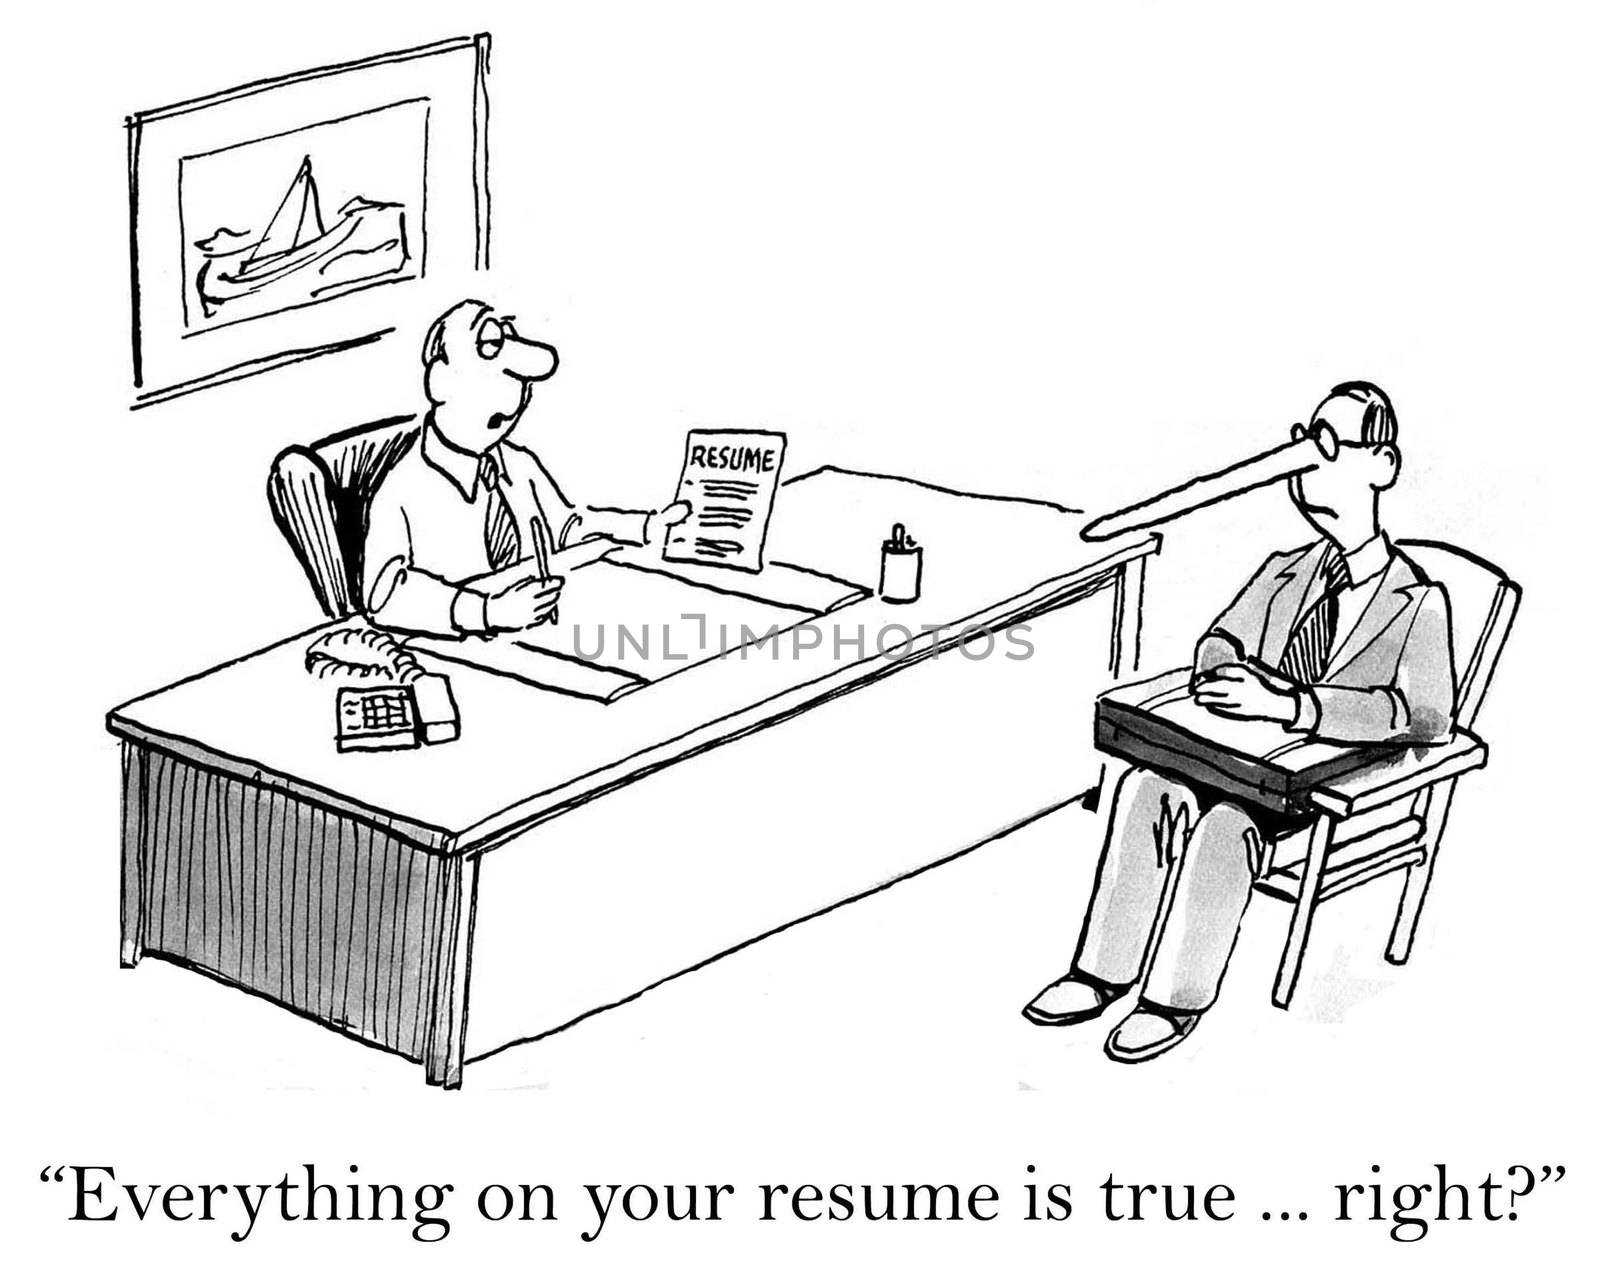 "Everything on your resume is true, right?"